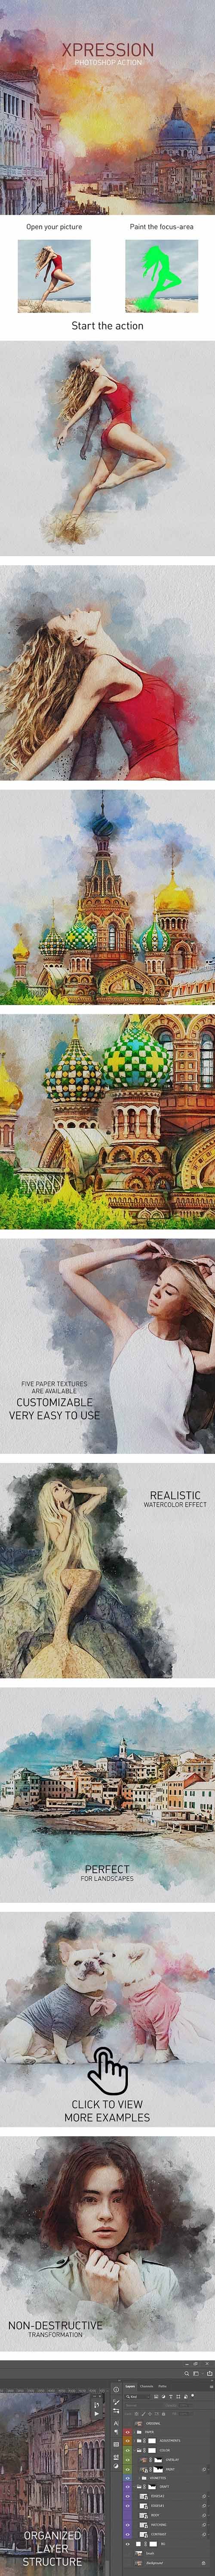 GraphicRiver - XPRESSION | Watercolor Painting PS Action  - 28522608